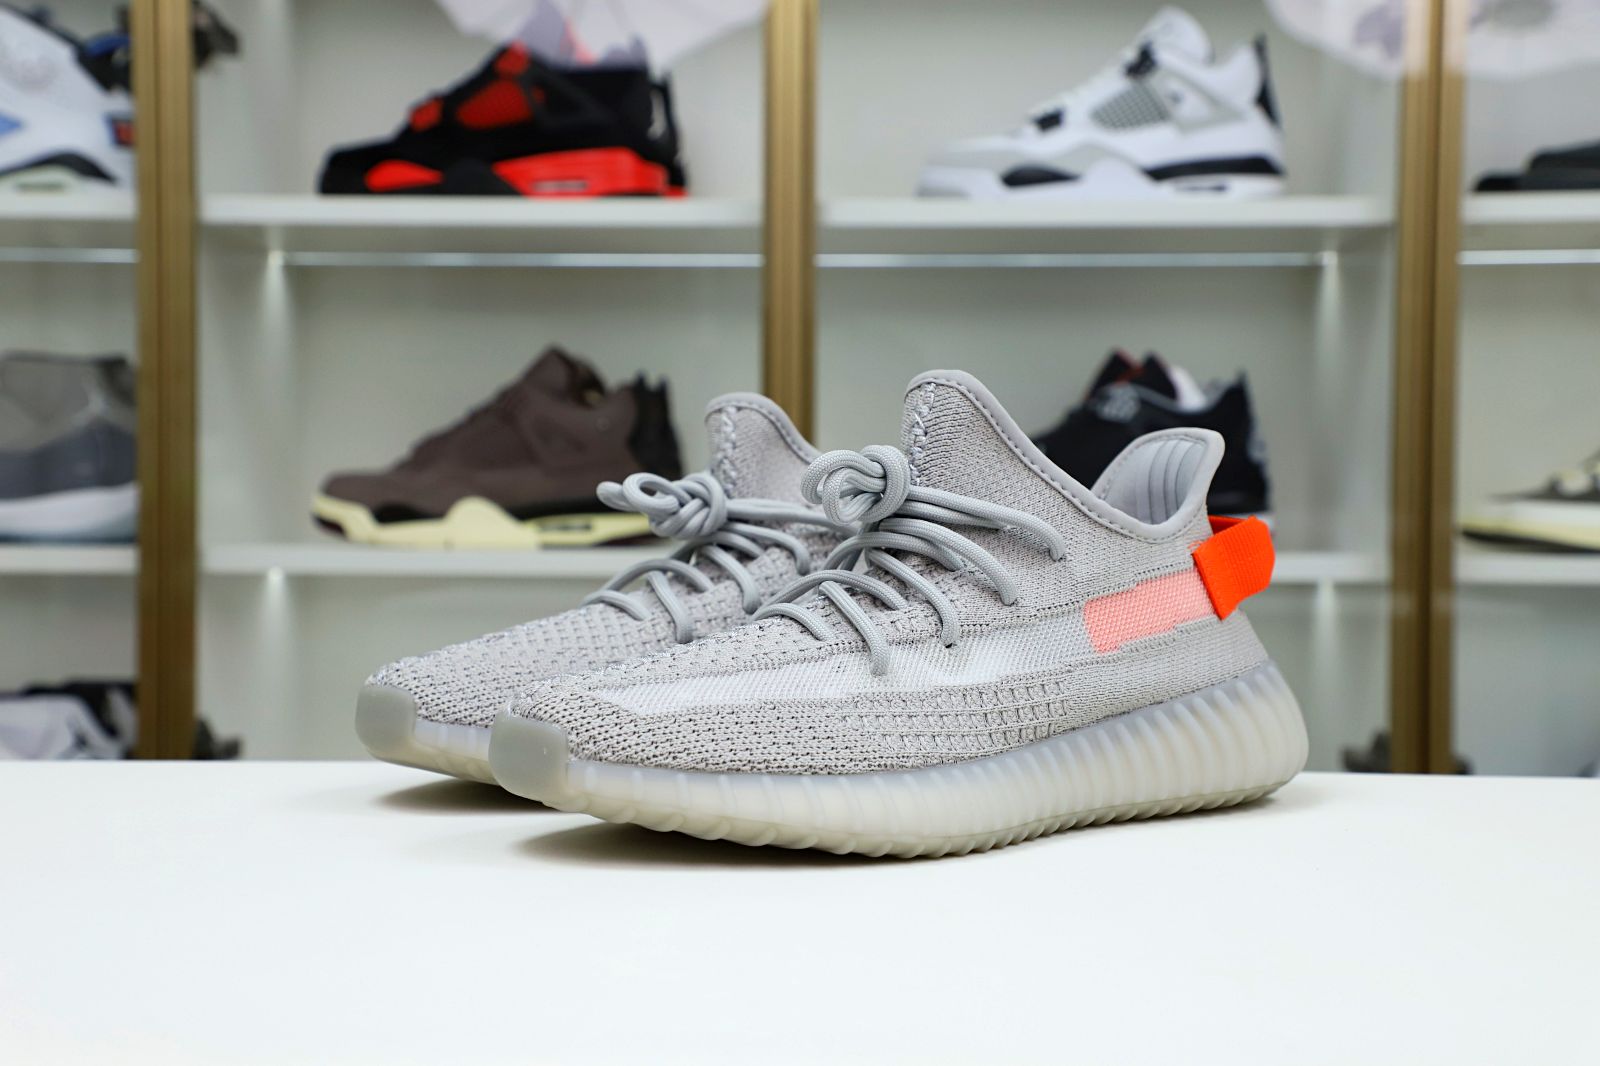 Yeezy Boost 350 V2 “Tail